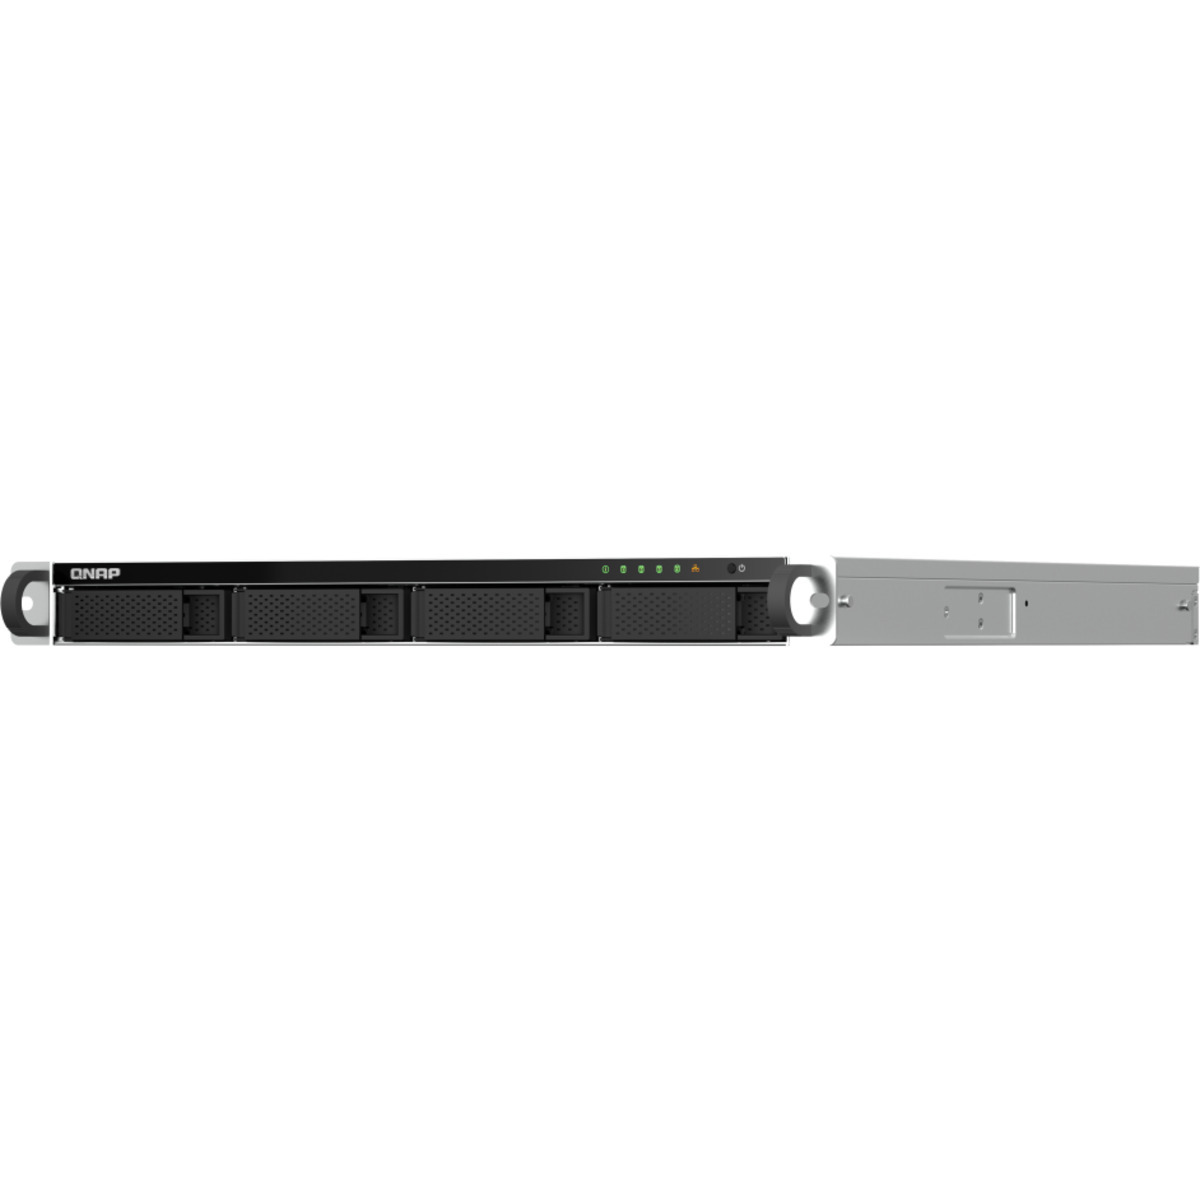 QNAP TS-464U-RP 96tb 4-Bay RackMount Multimedia / Power User / Business NAS - Network Attached Storage Device 4x24tb Seagate IronWolf Pro ST24000NT002 3.5 7200rpm SATA 6Gb/s HDD NAS Class Drives Installed - Burn-In Tested TS-464U-RP